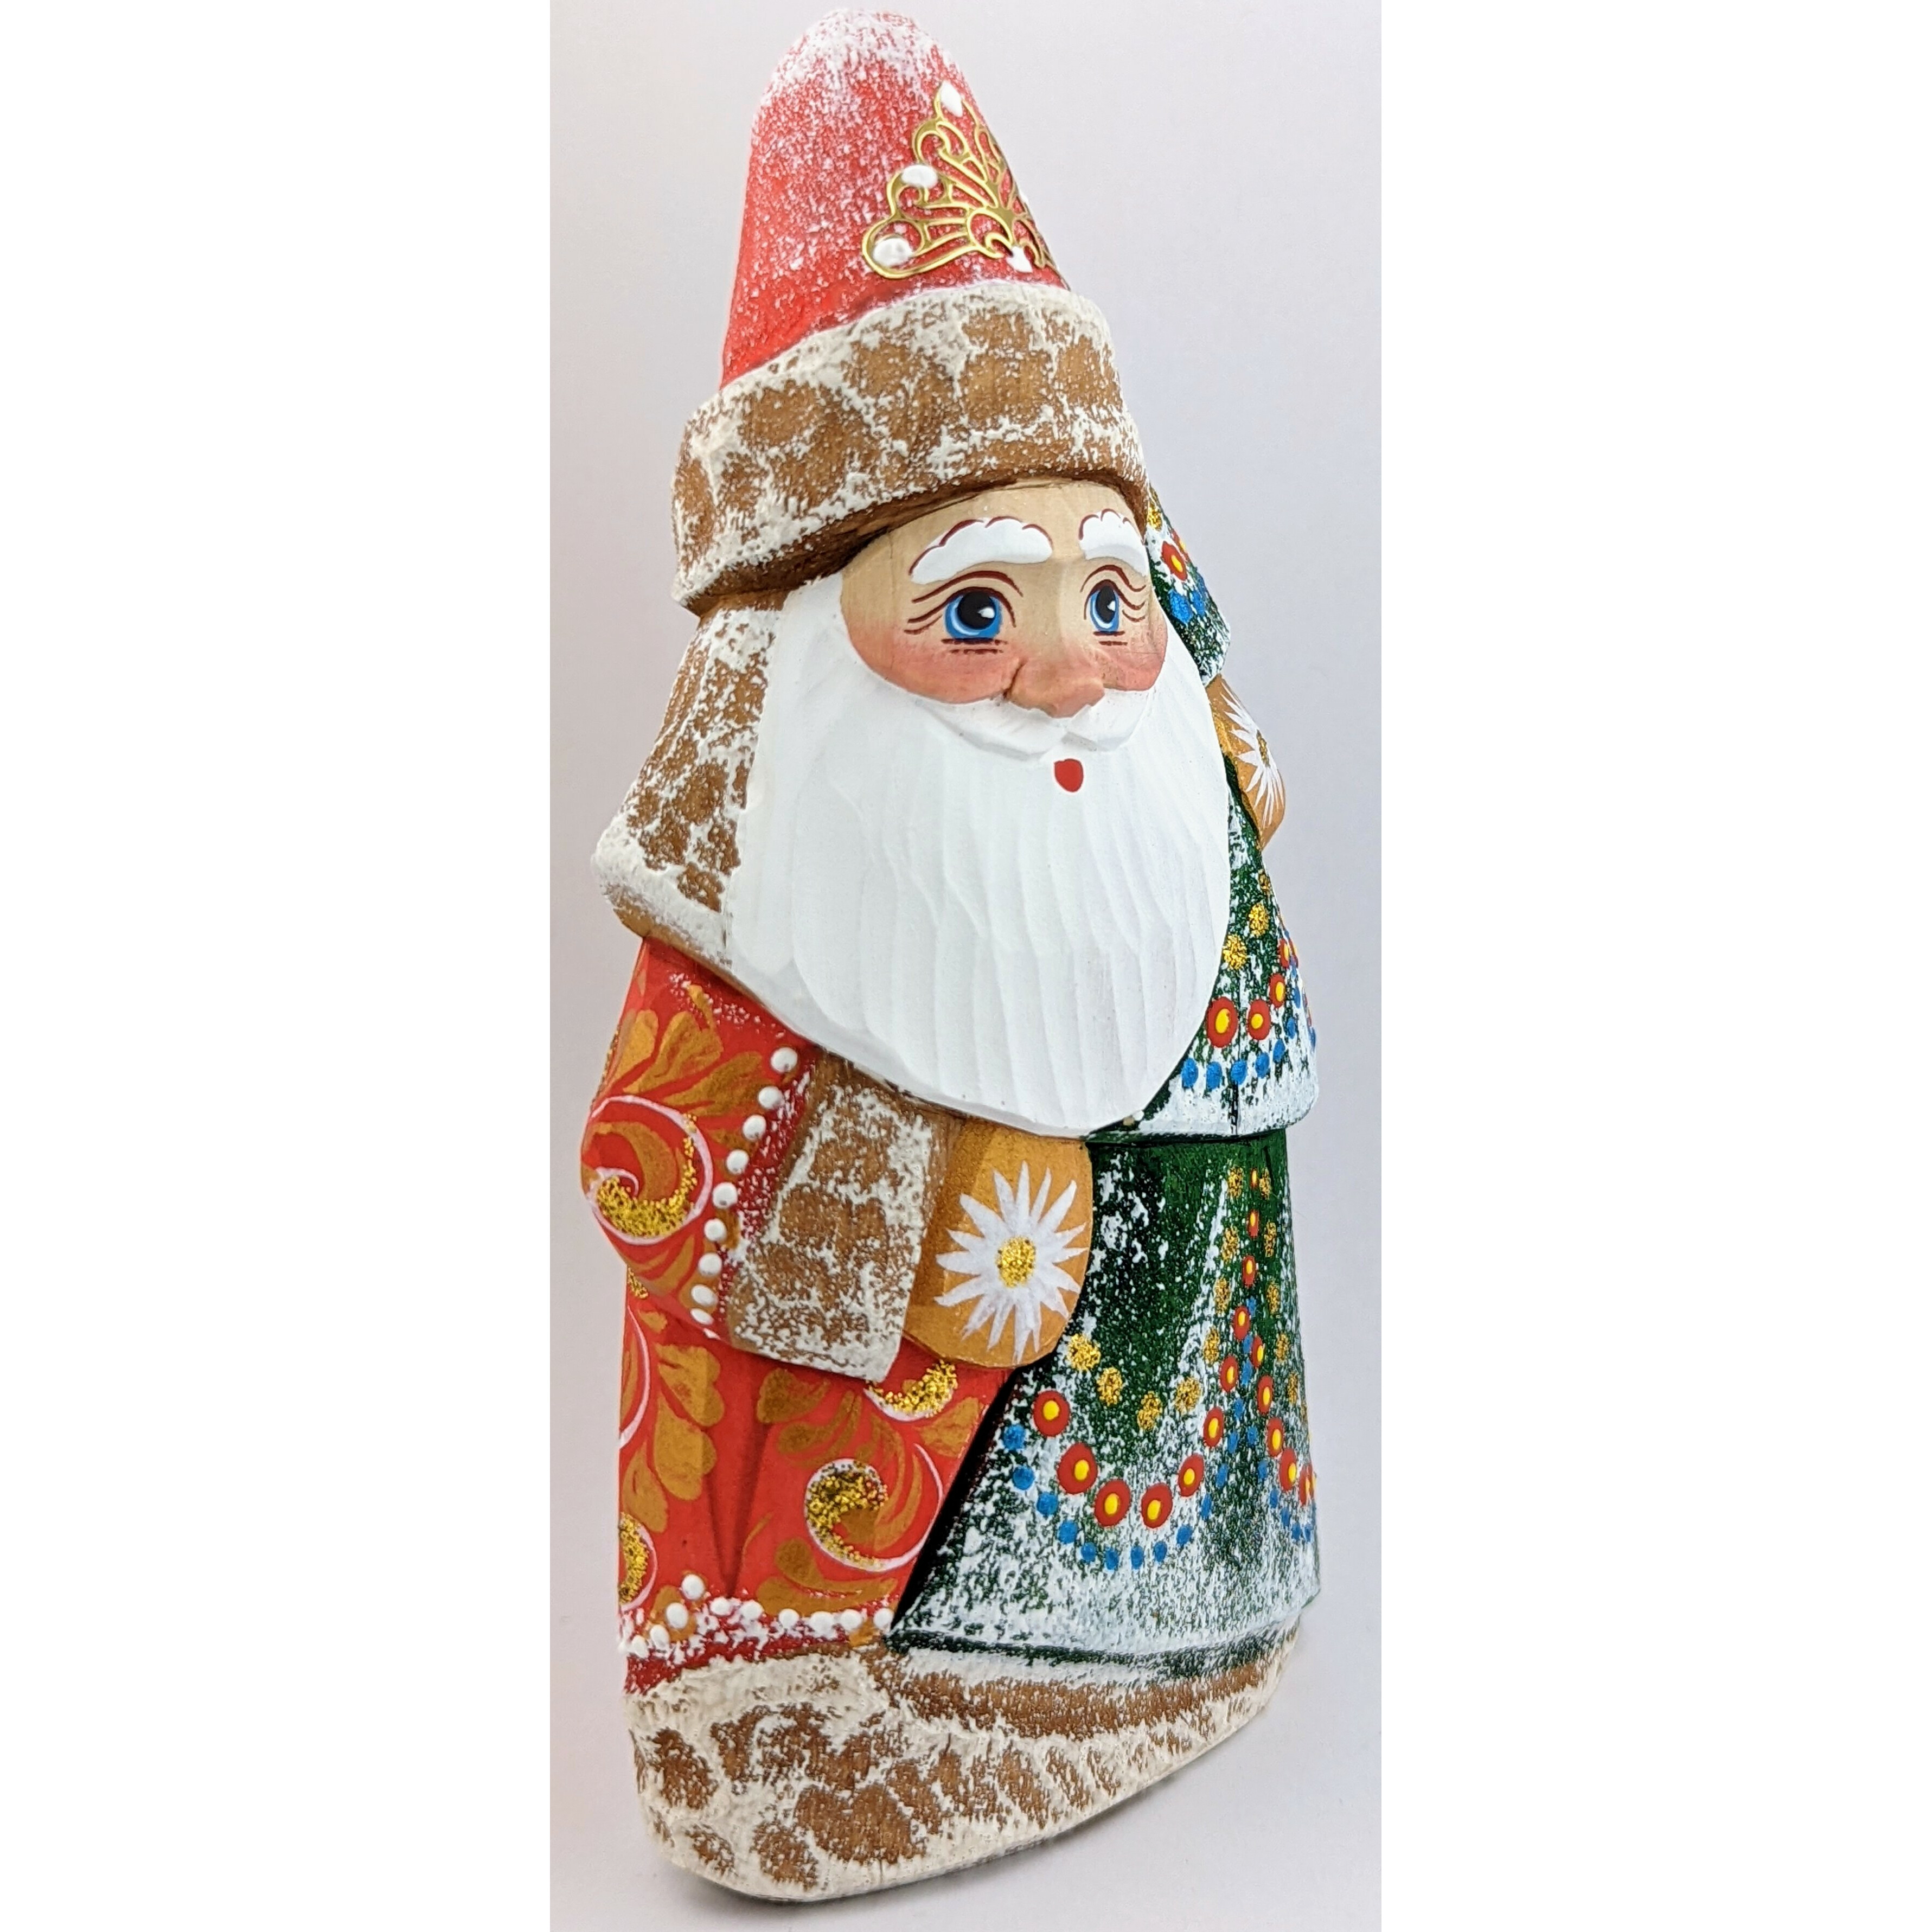 SANTA CLAUS STATUETTE CHRISTMAS RUSSIAN FATHER FROST HAND CARVED WOODEN FIGURE 